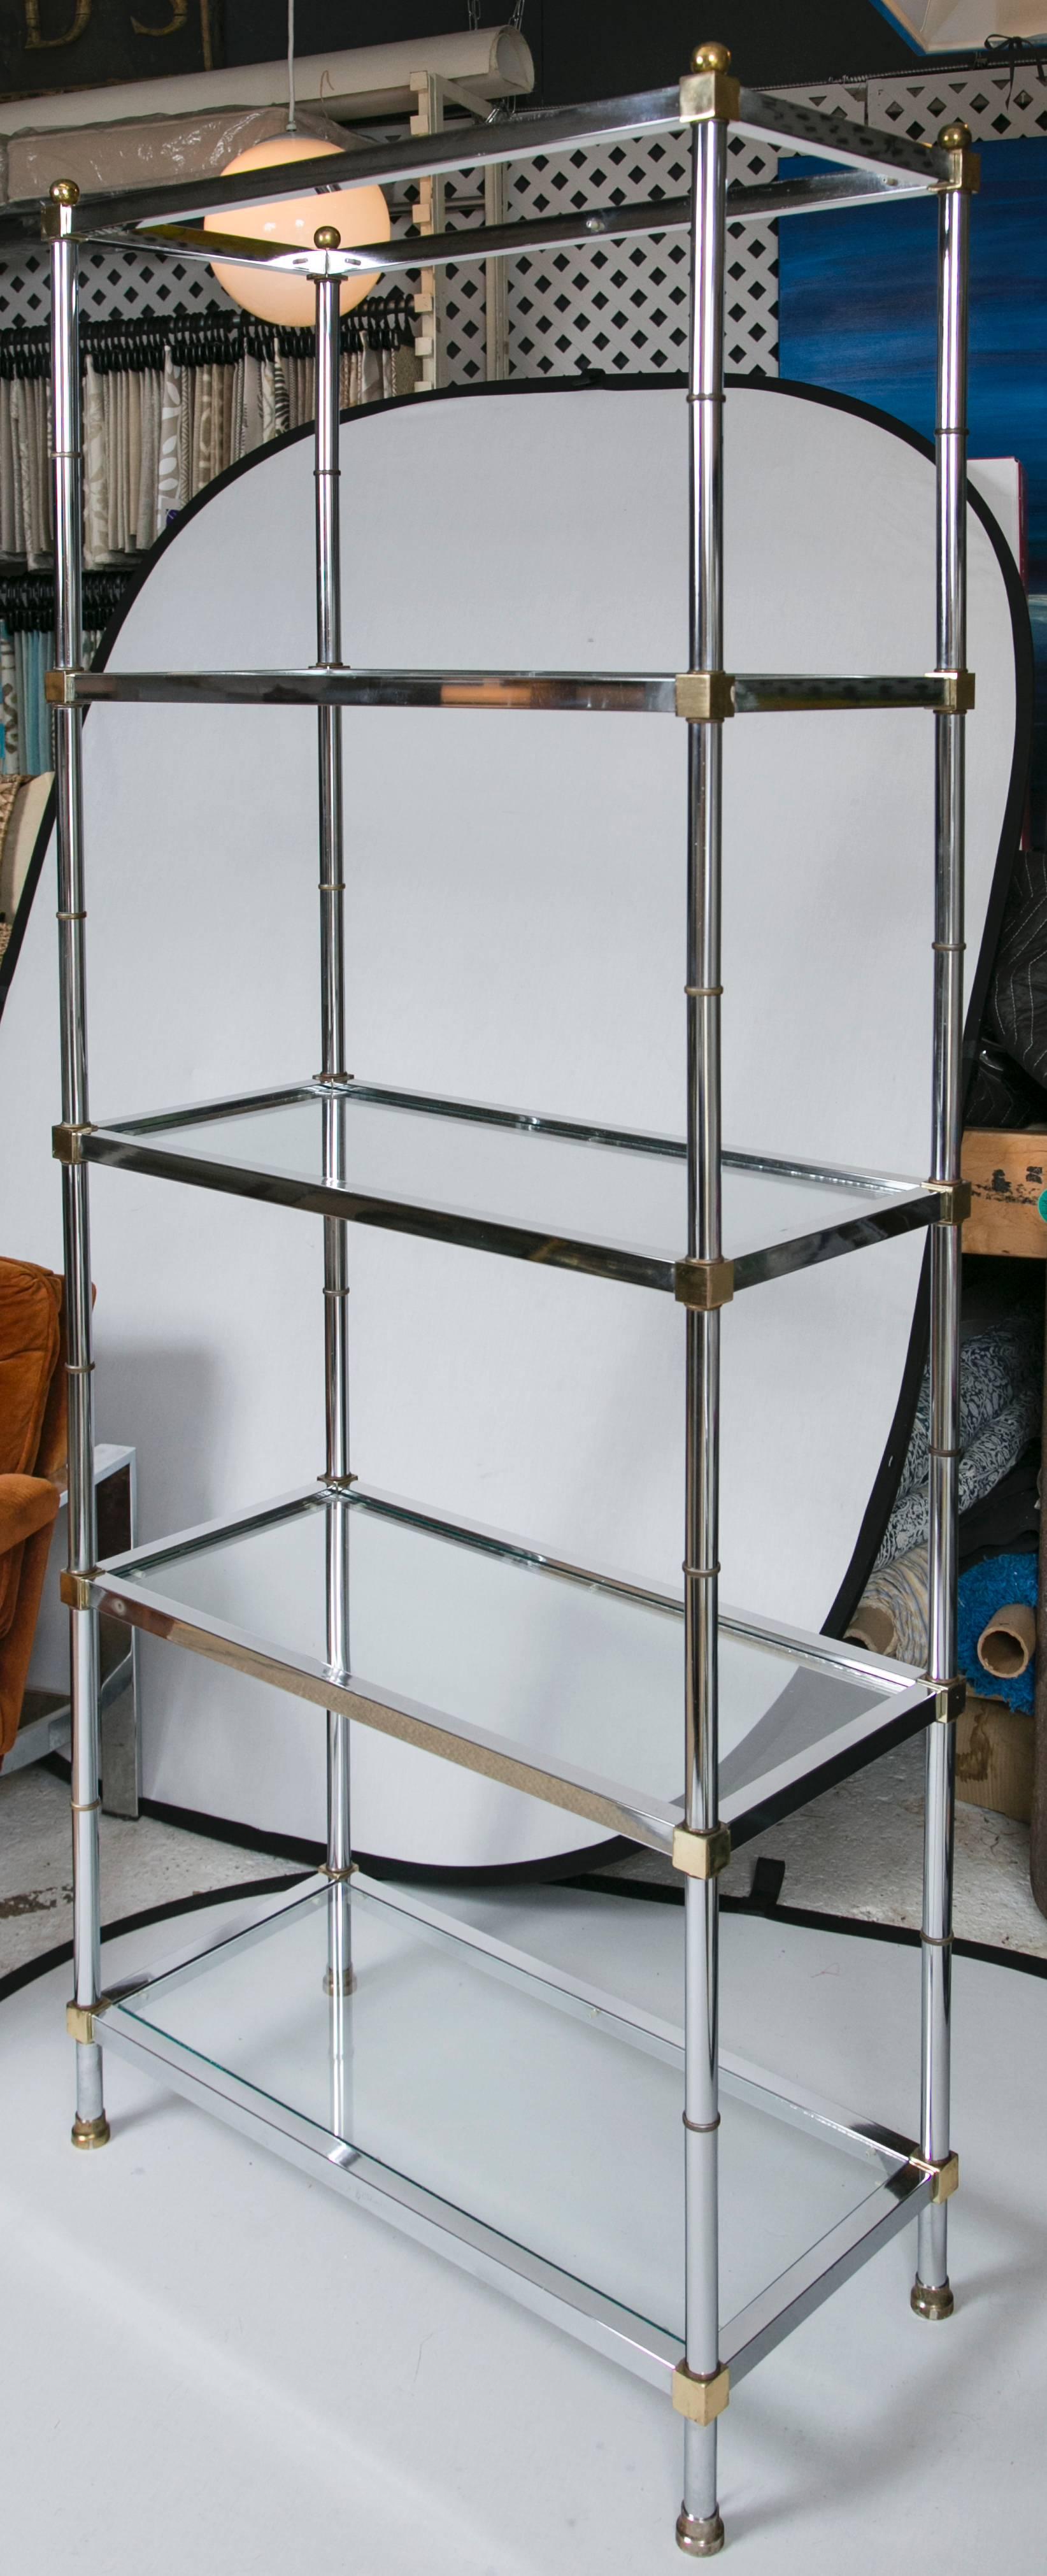 An excellently styled brass and chrome etagere in the Maison Jensen motif. Five shelves for optimal storage and display of your most cherished pieces. Well proportioned for a small space with plenty of room for storage.